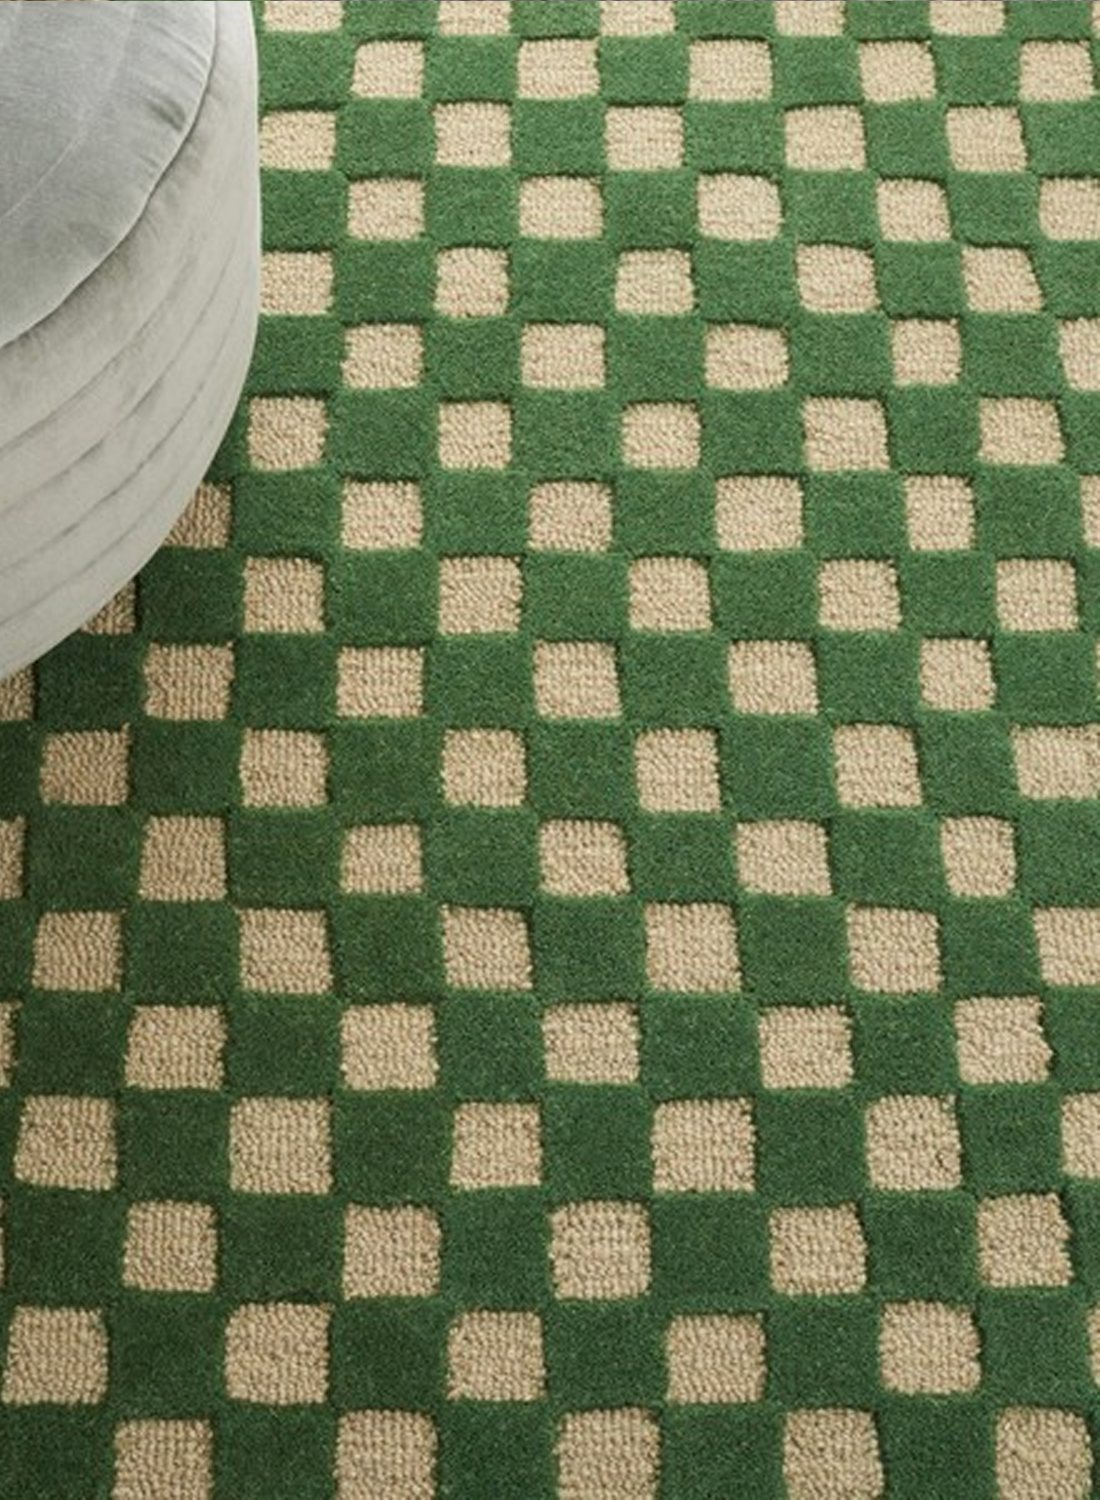 Field Checkered Rug